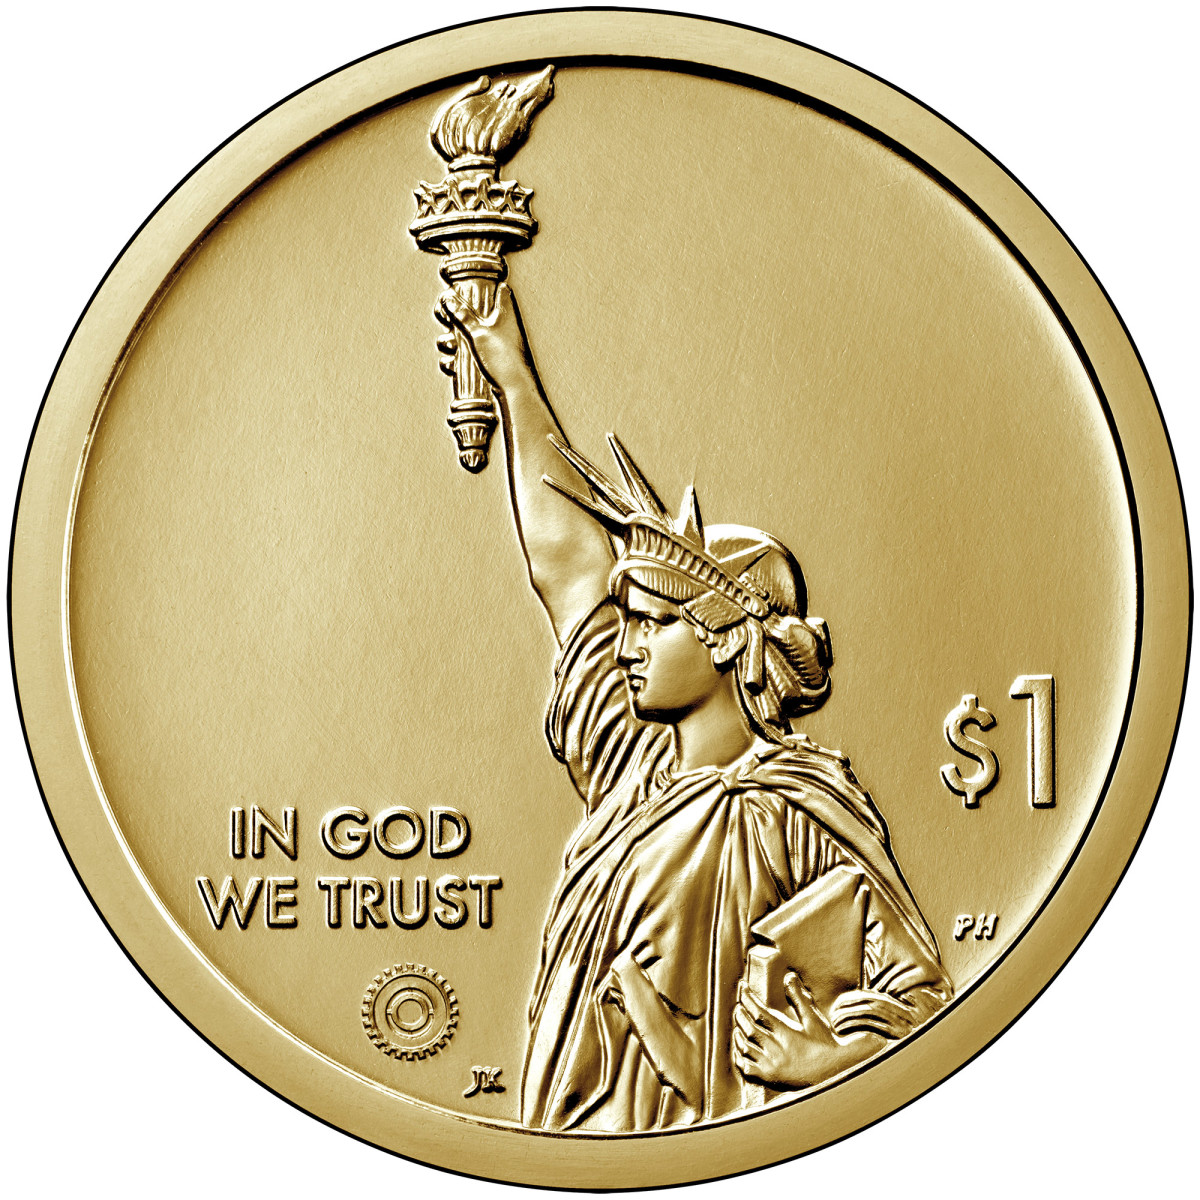 Common obverse of the American Innovation dollar. (Image courtesy United States Mint.)